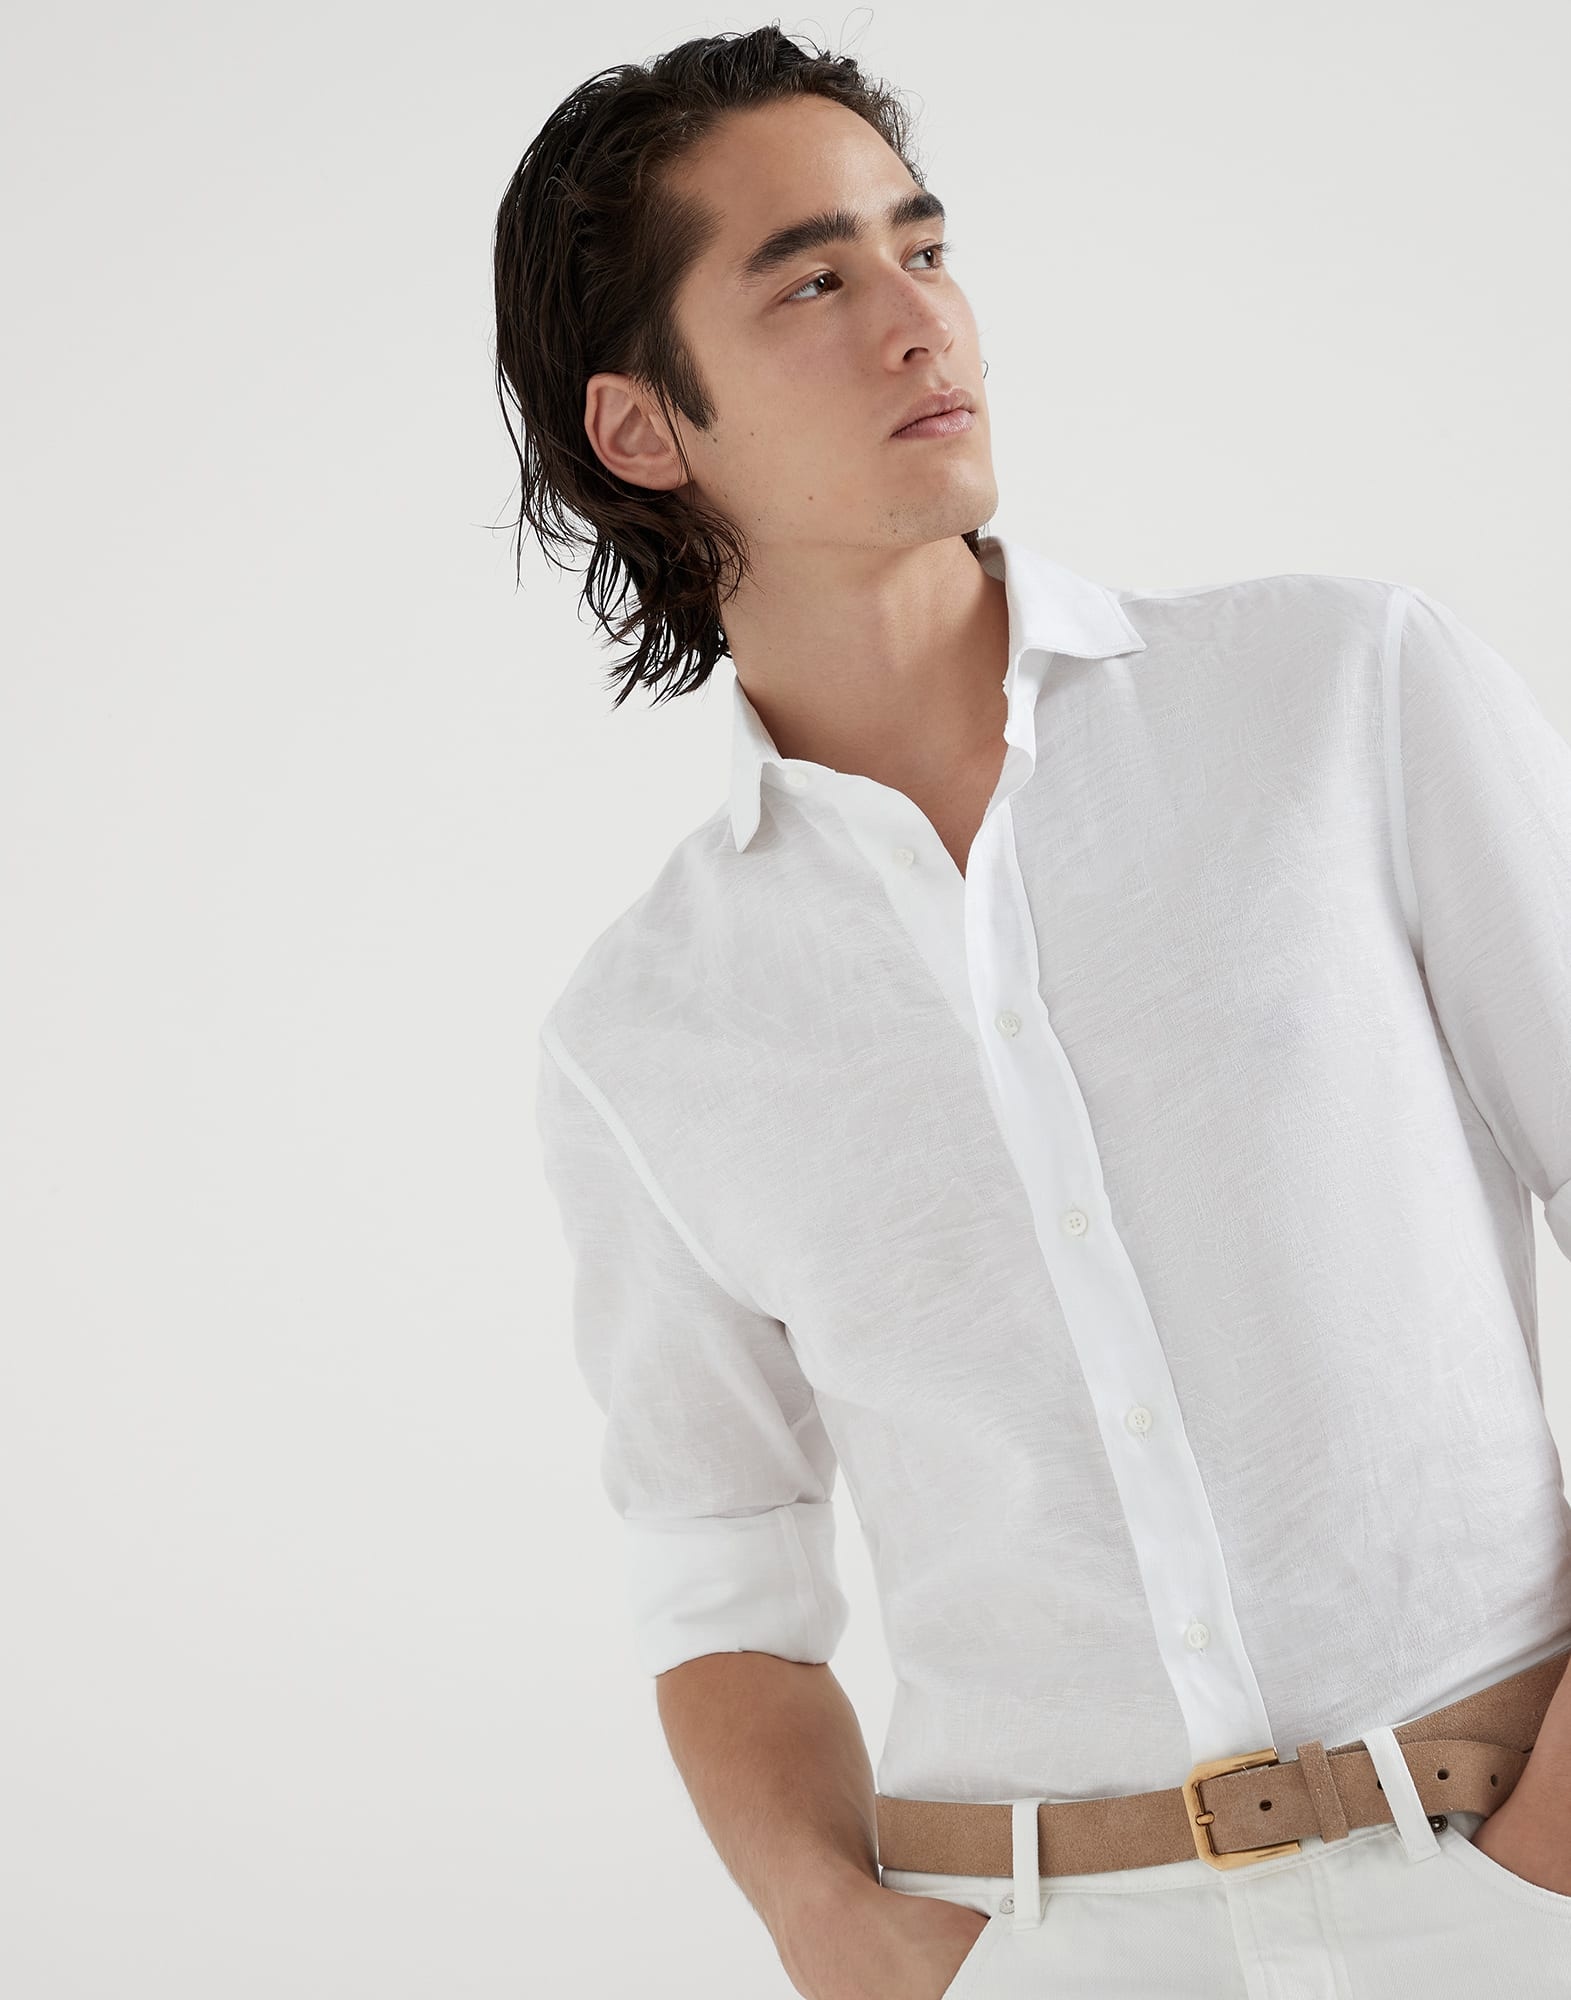 Palm Jacquard linen and cotton easy fit shirt with spread collar - 4